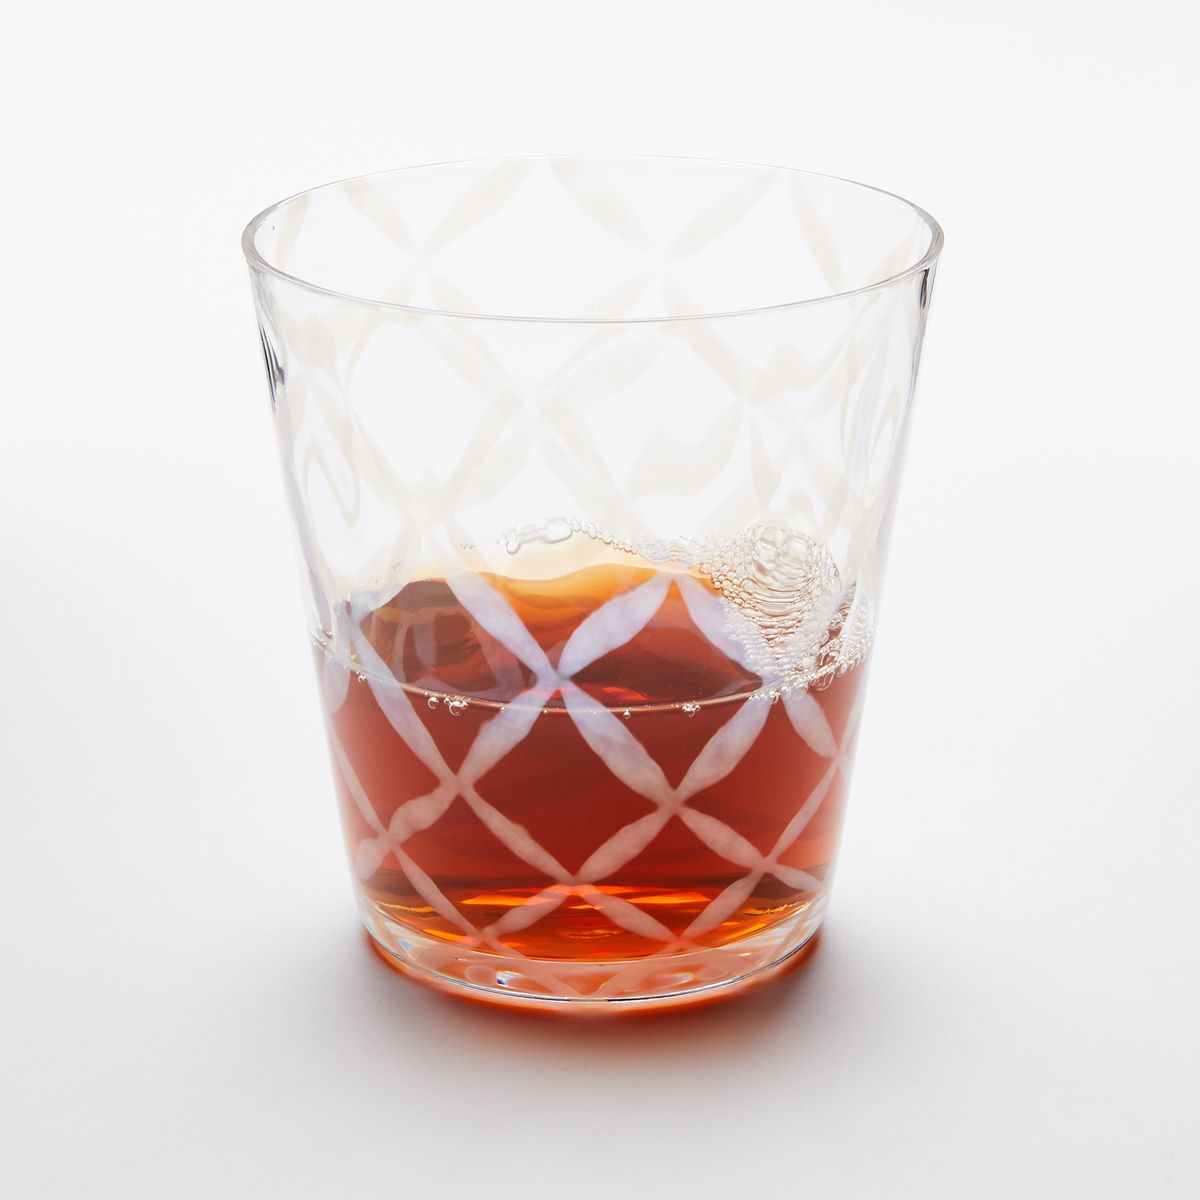 A short clear glass with a delicate grid pattern, half filled with a drink